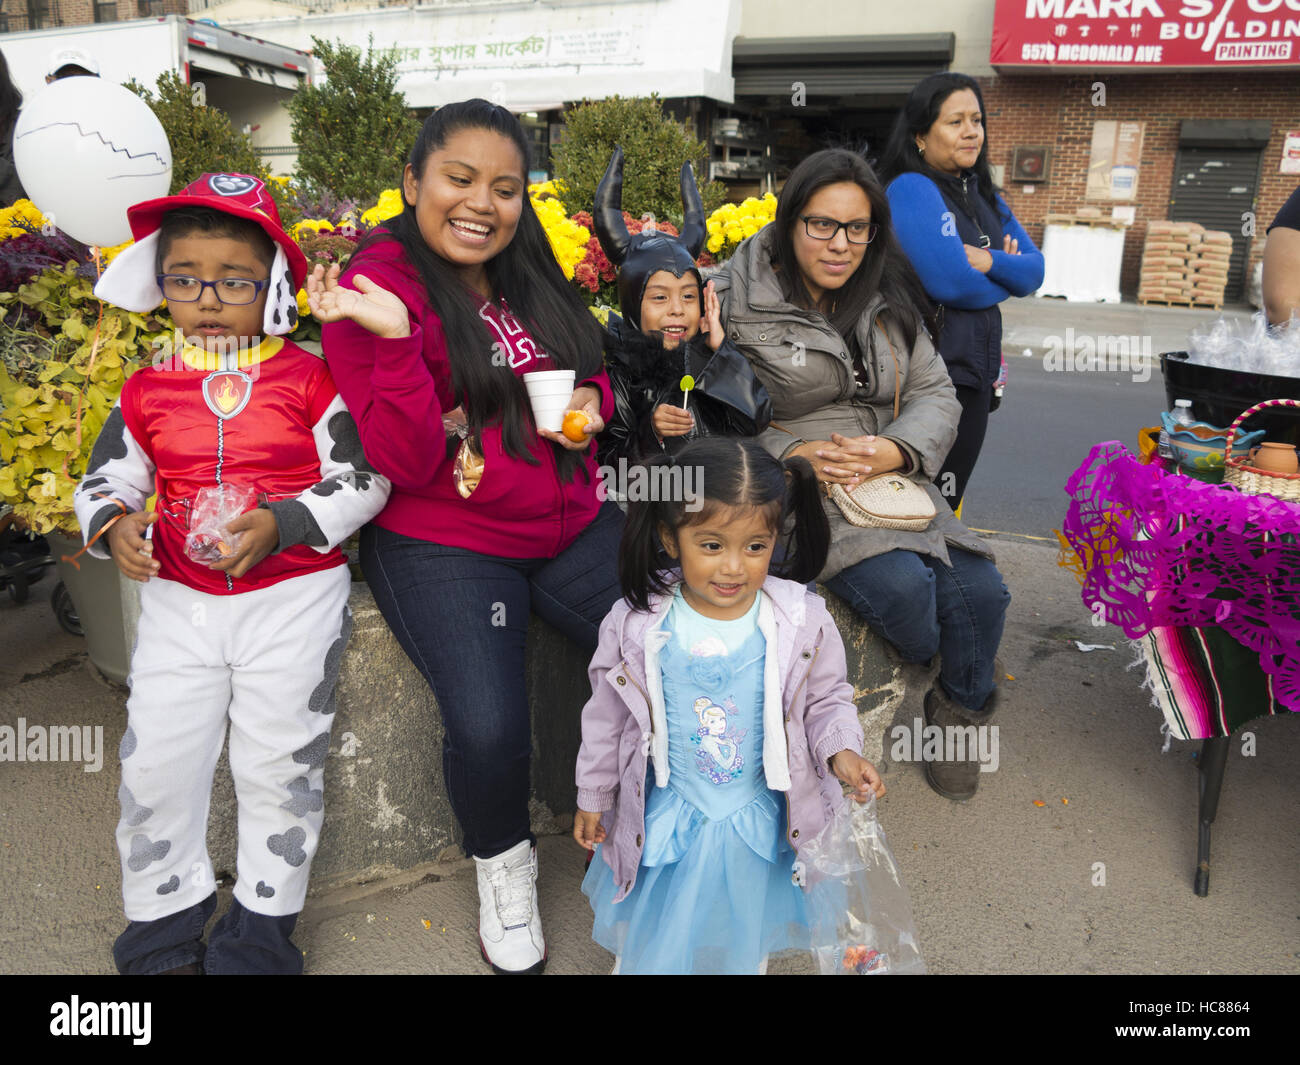 Families at First Annual Day of the Dead Celebration in the Kensington section of Brooklyn, New York on October 30, 2016. Stock Photo